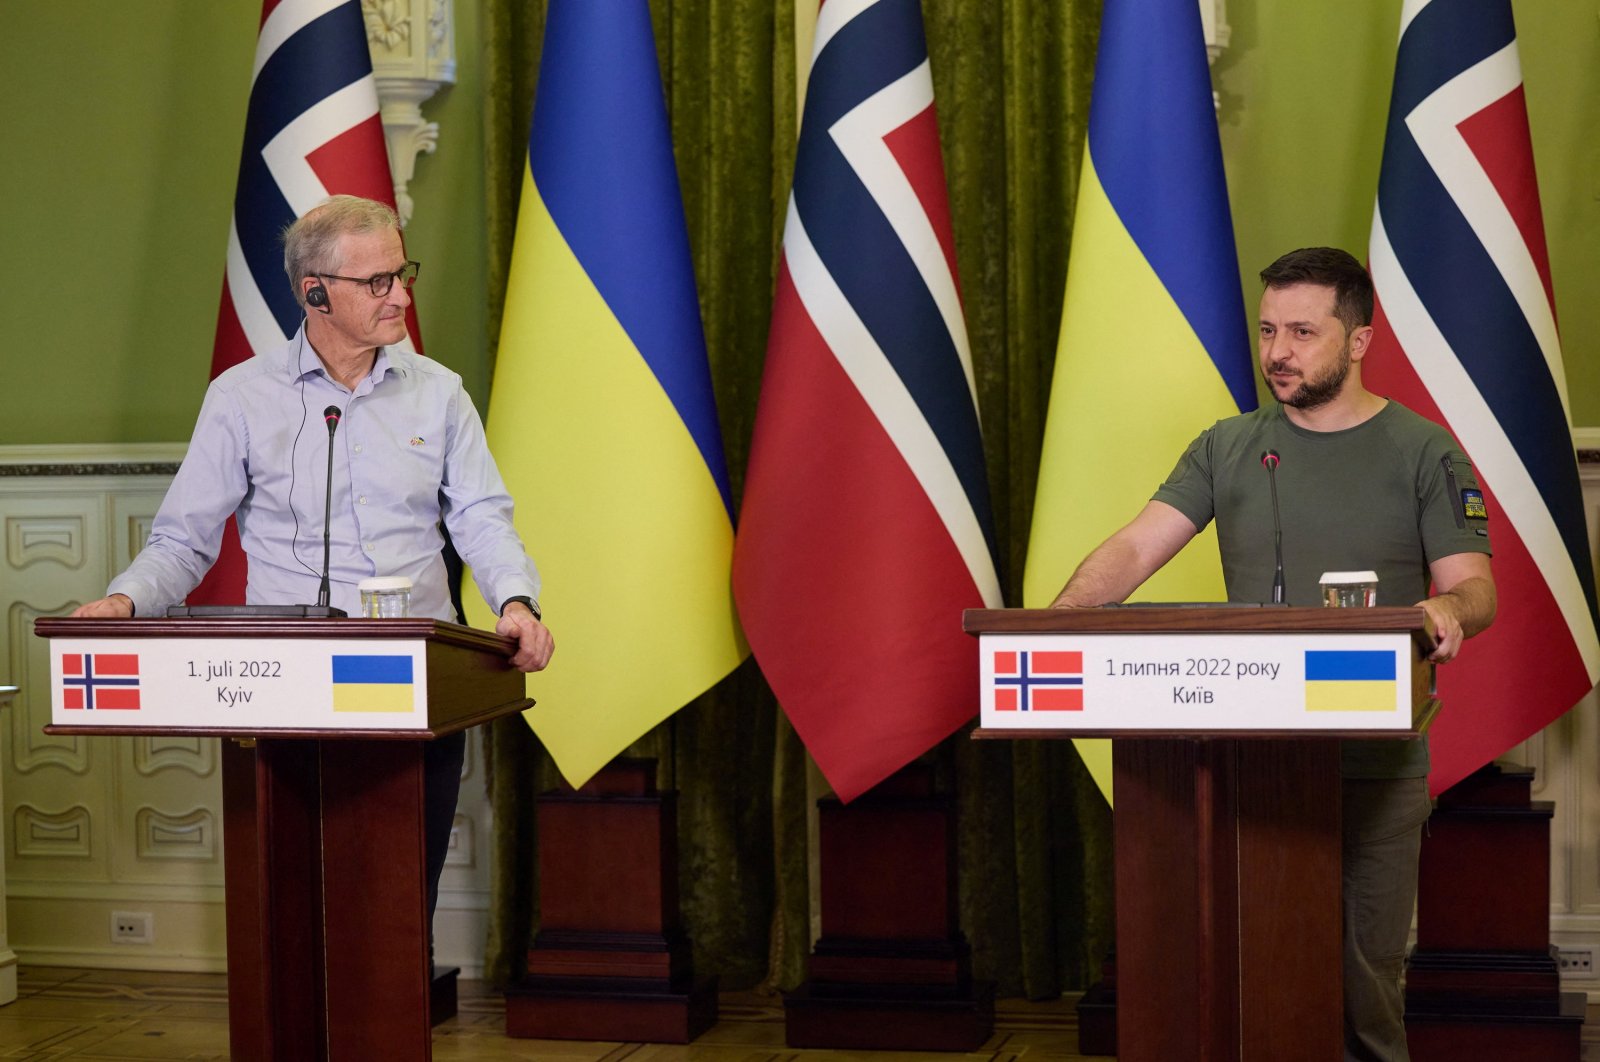 Norwegian Prime Minister Jonas Gahr Stoere and Ukrainian President Volodymyr Zelenskyy attend a joint news briefing, as Russia&#039;s attack on Ukraine continues, Kyiv, Ukraine, July 1, 2022. 8Ukrainian Presidential Press Service Handout via Reuters)